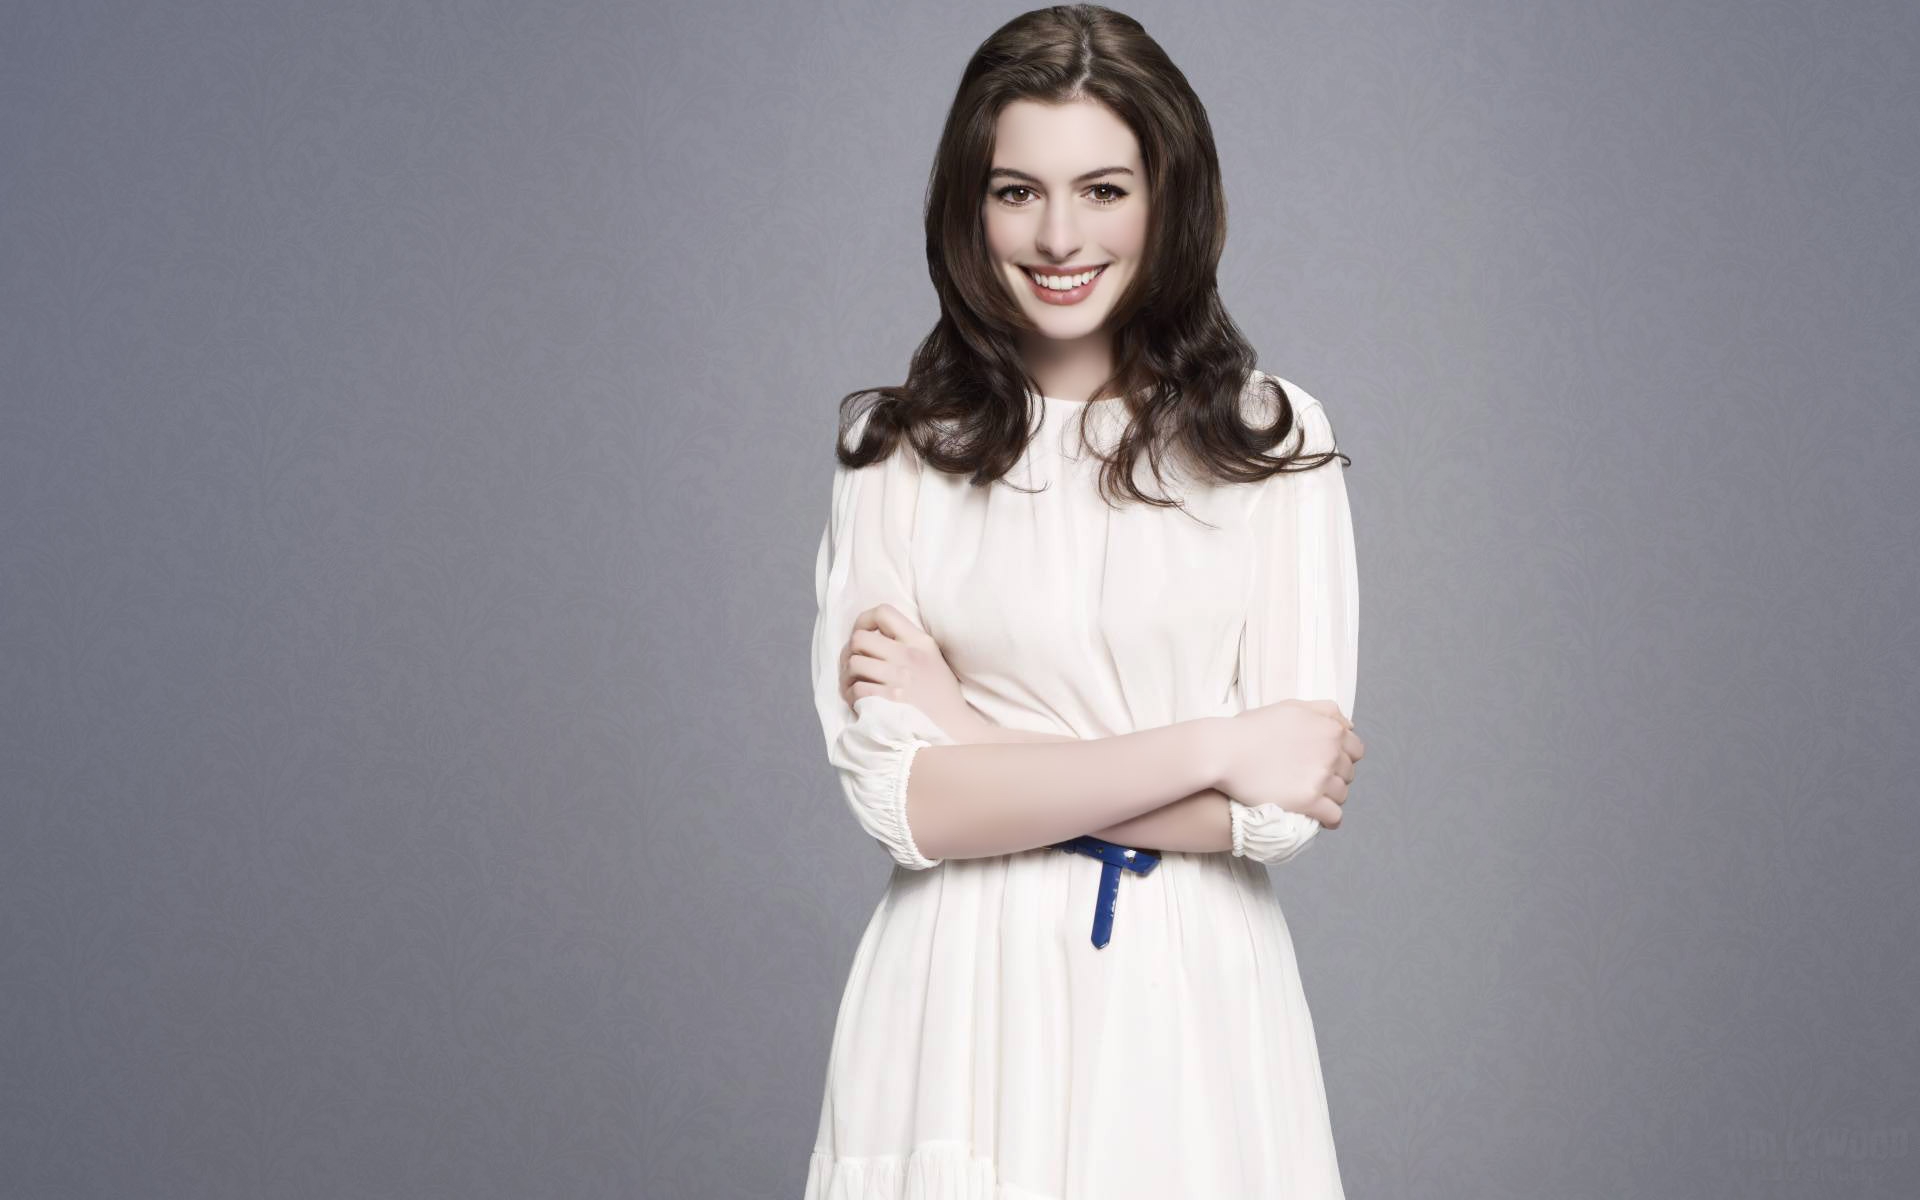 Cute Anne Hathaway for 1920 x 1200 widescreen resolution